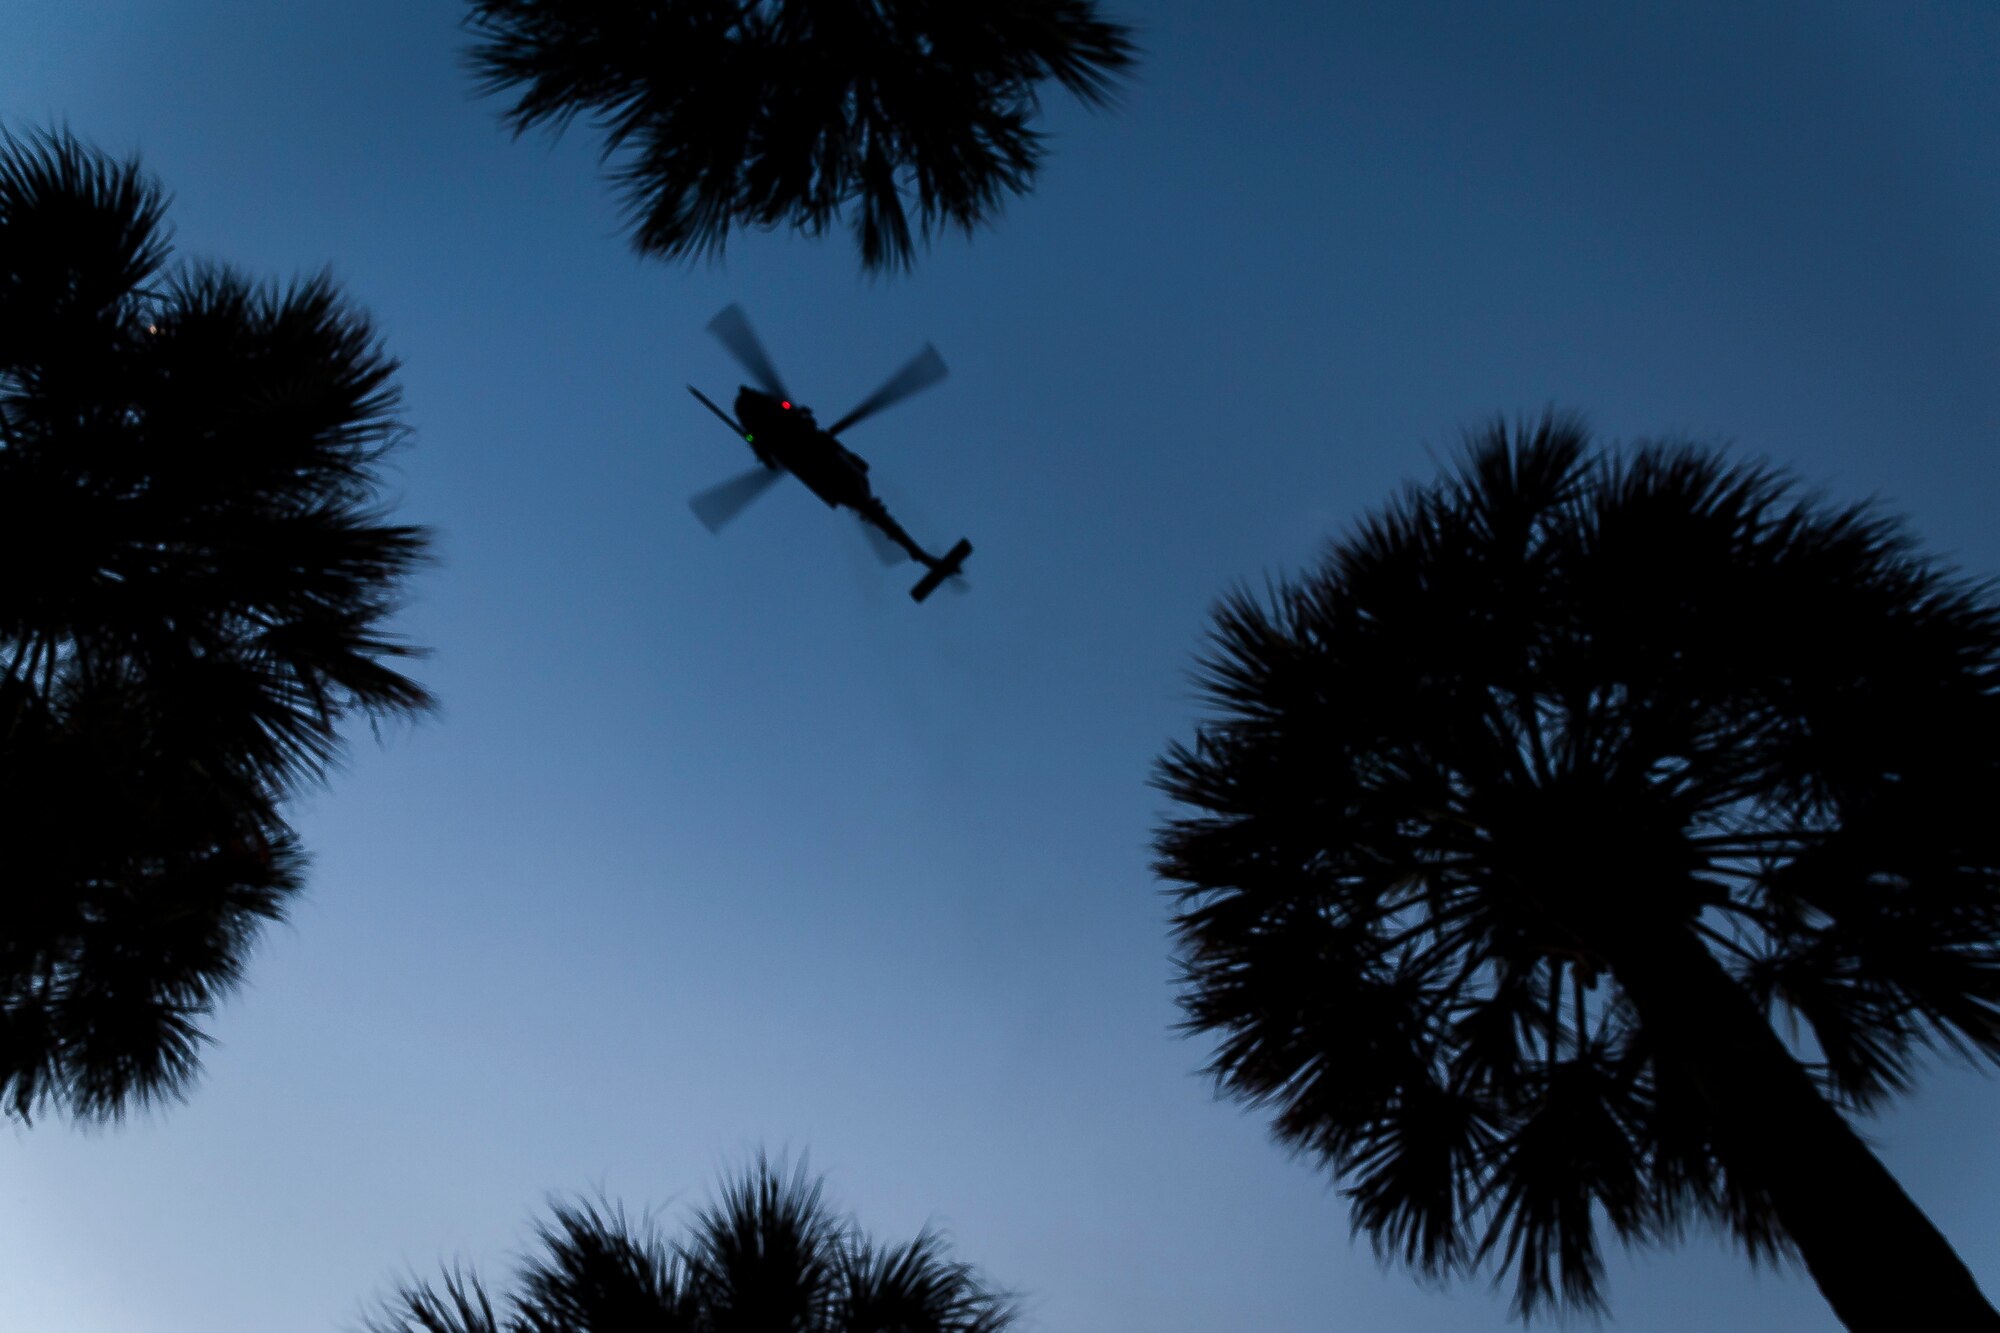 An HH-60G Pave Hawk flies over Valdosta State University after National Night Out Aug. 6, 2019, in Valdosta, Ga. National Night Out is an annual event that promotes relationships between police and the community in an effort to prevent crime. Representatives from Team Moody participated to create local community awareness and build support for the Air Force mission. (U.S. Air Force photo by Airman 1st Class Hayden Legg)